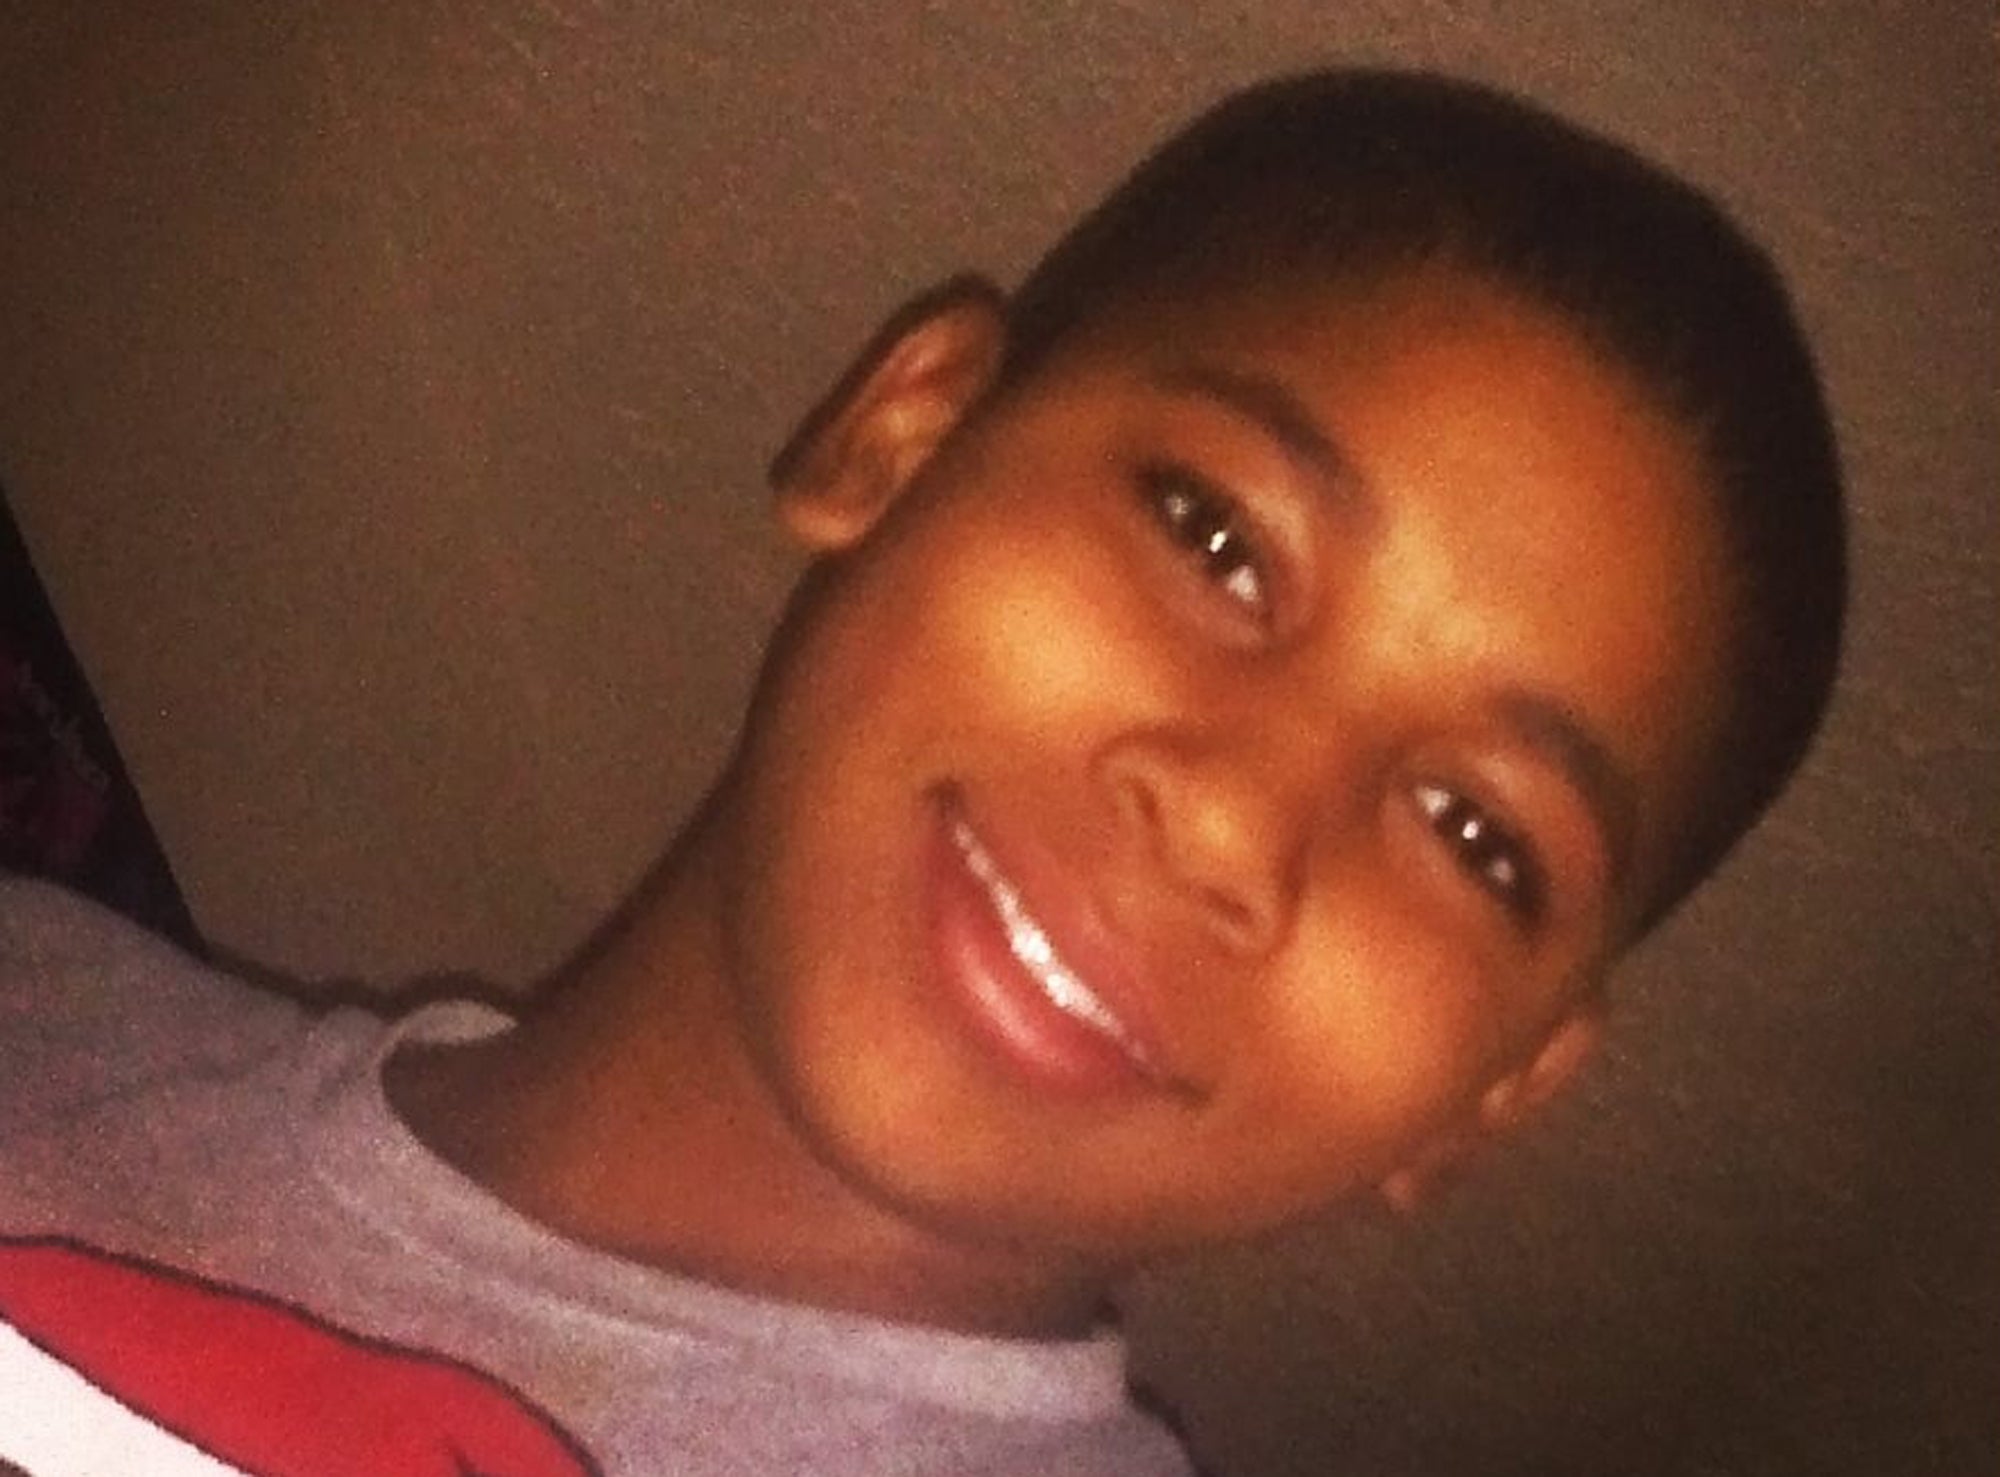 Police Dispatcher in Tamir Rice Shooting Resigns